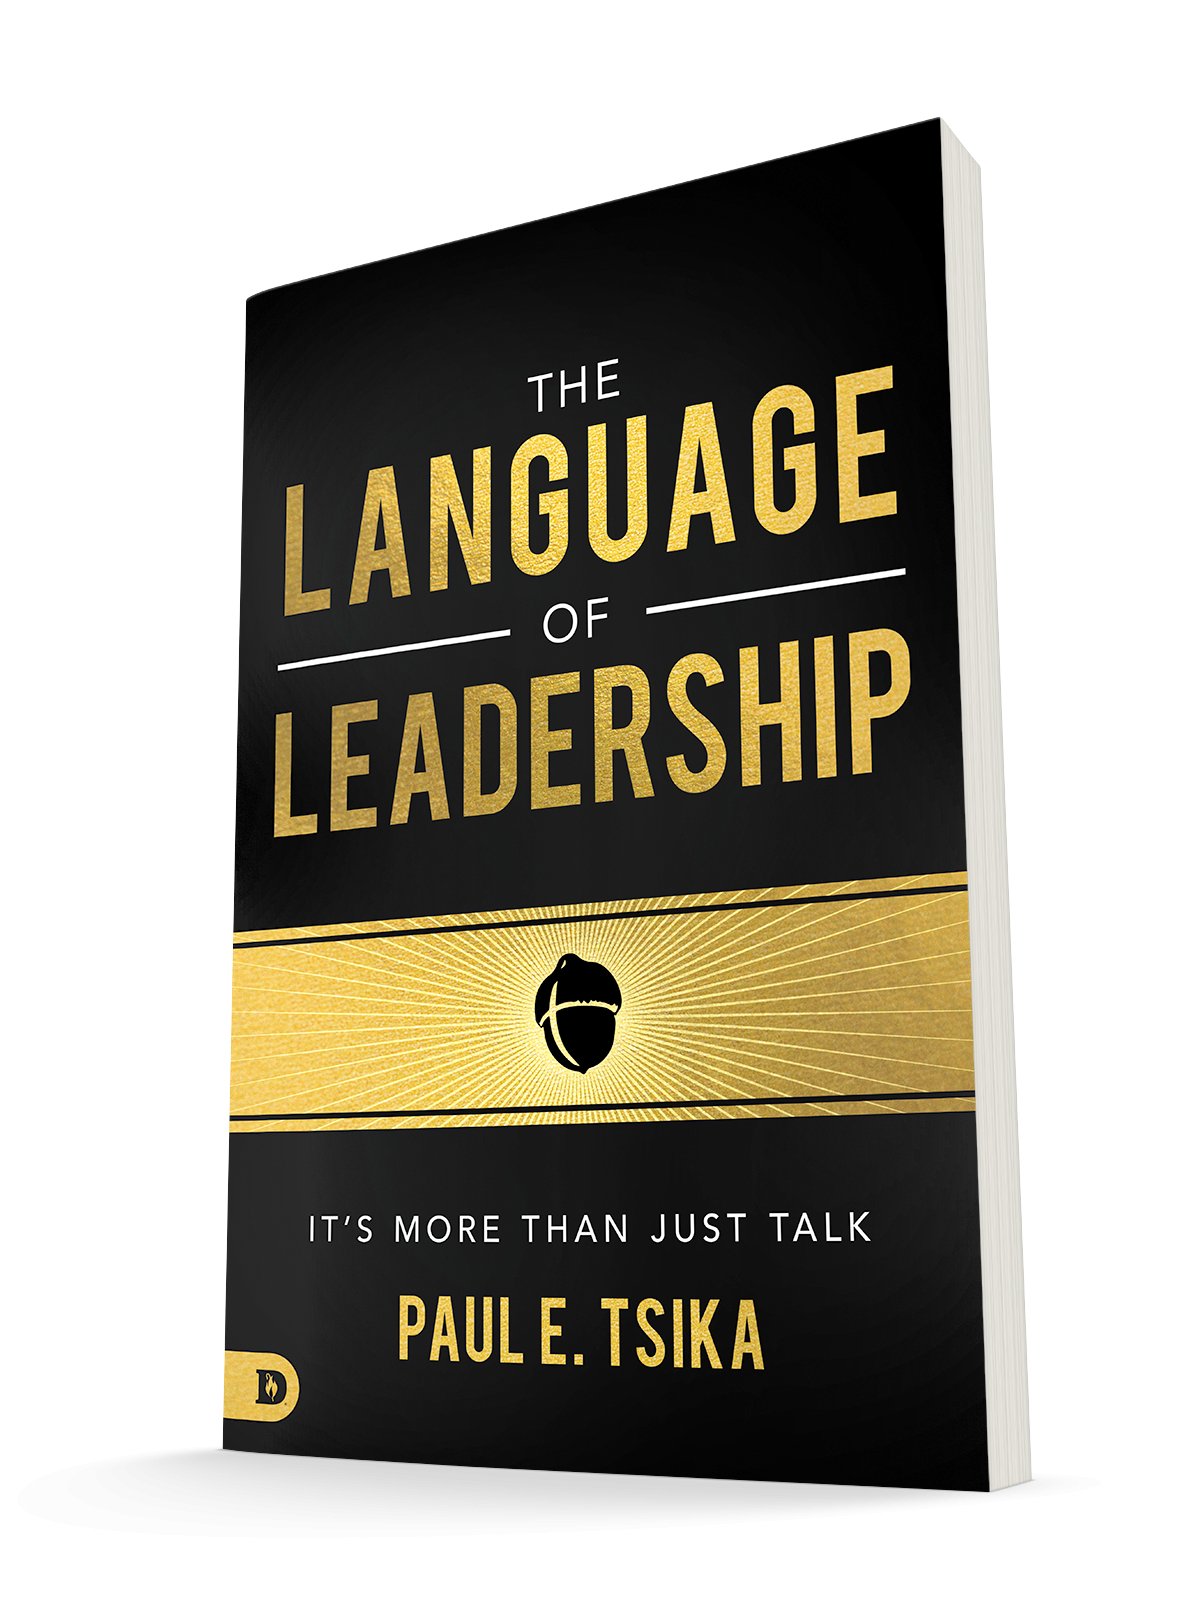 The Language of Leadership: It’s More Than Just Talk